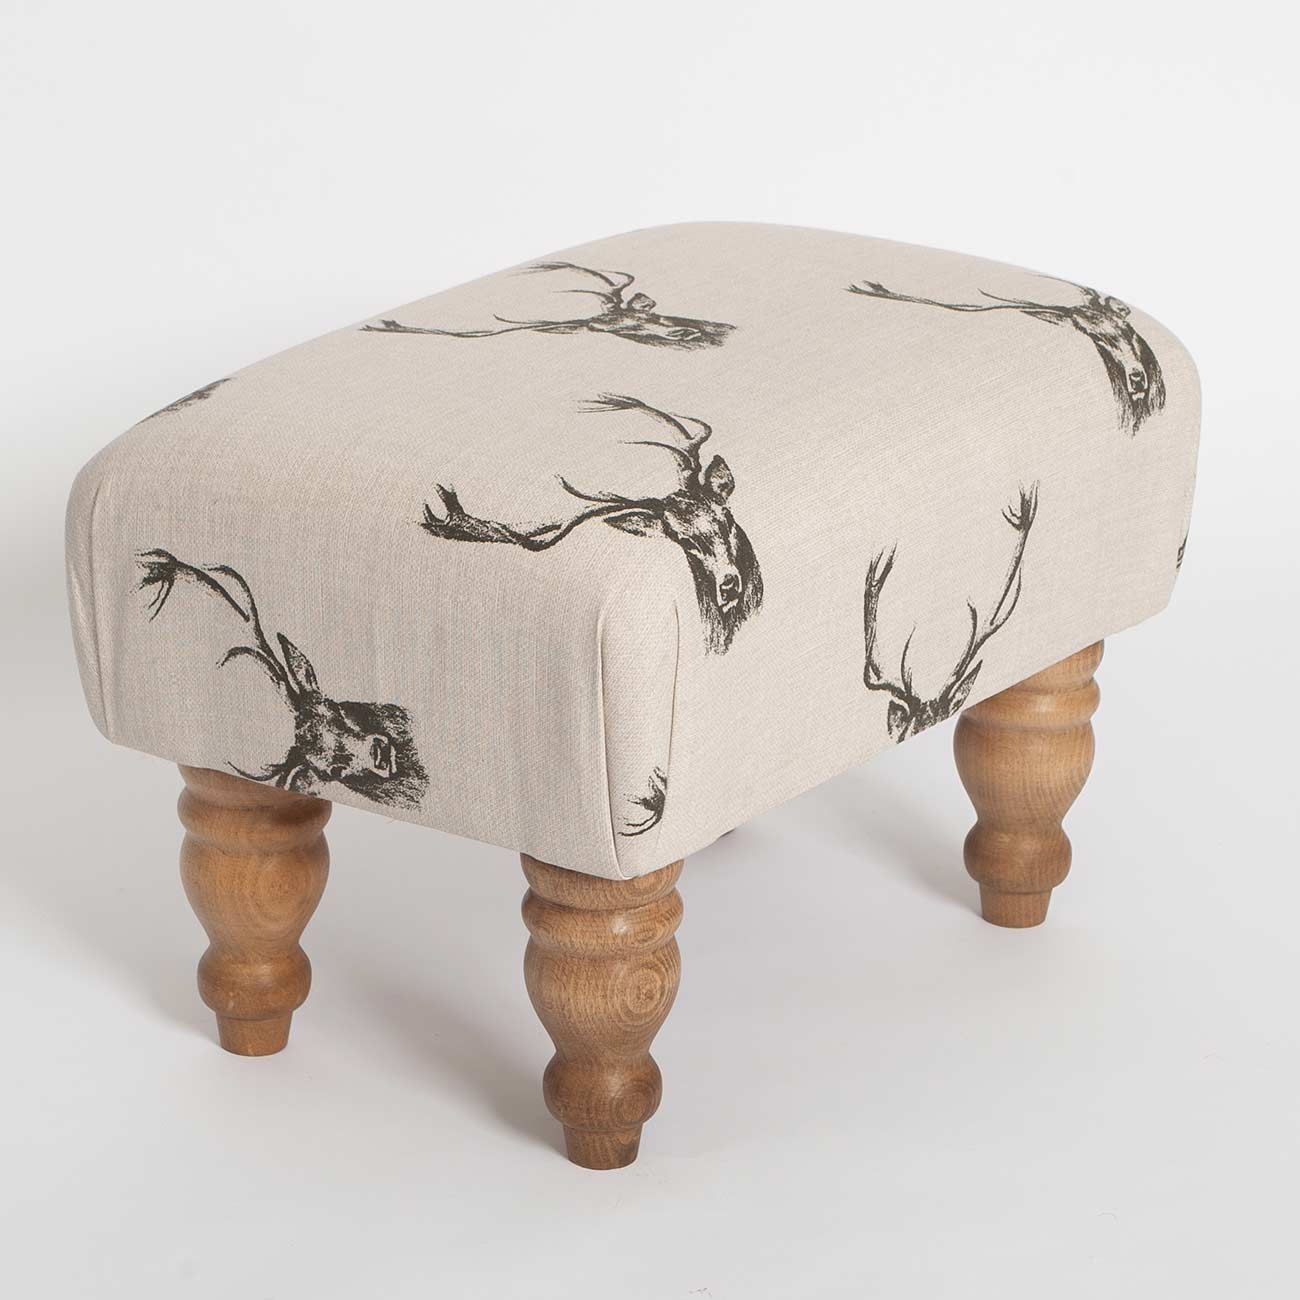 stag-head-footstool12 fabric from JLP